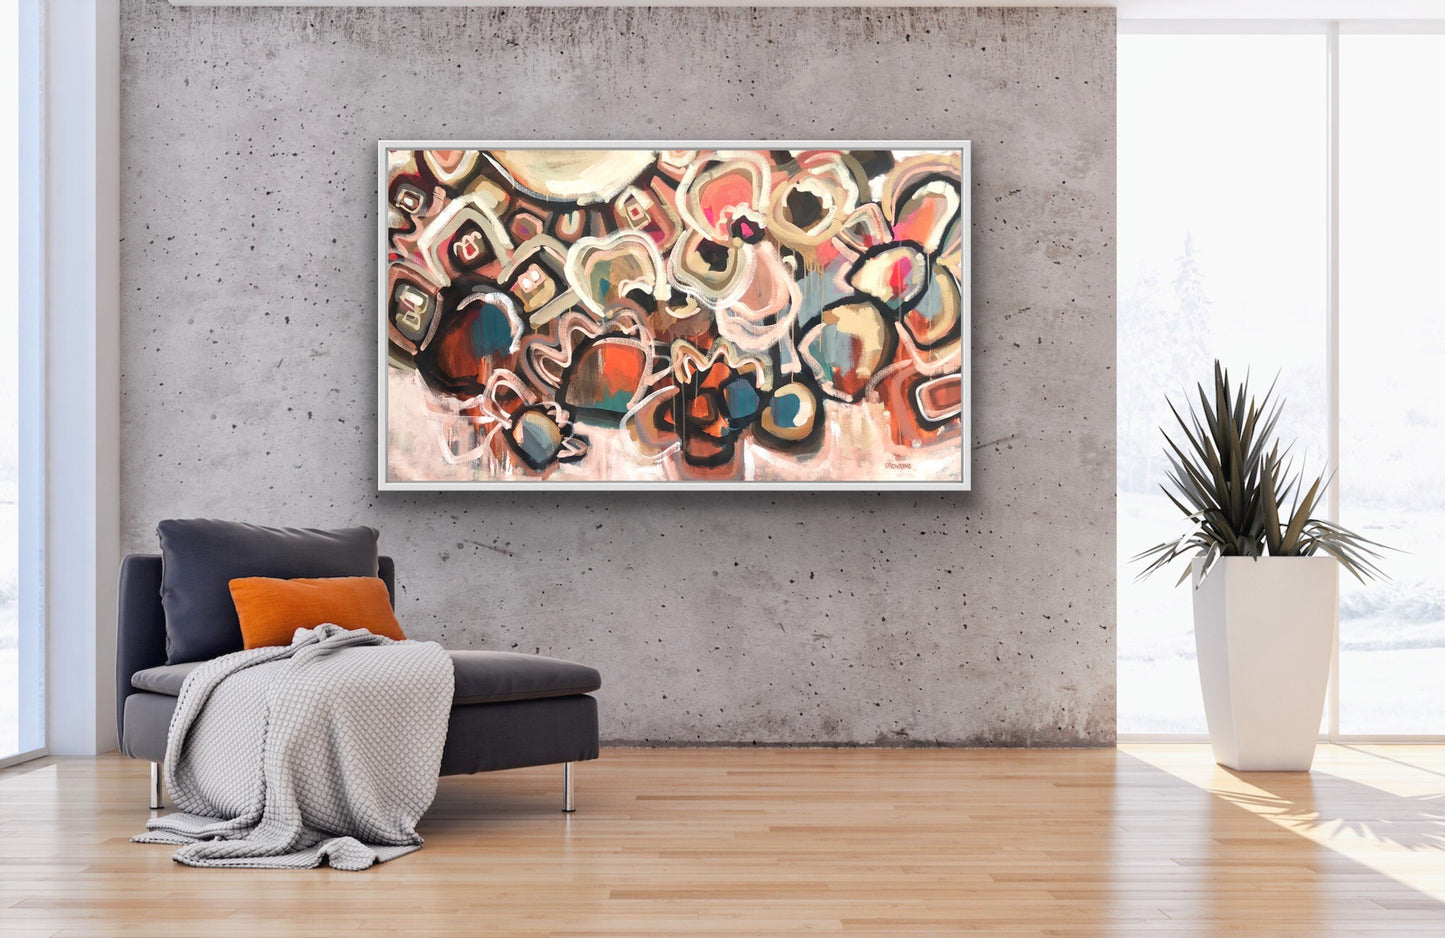 Moroccan Nights 155x85cm SOLD